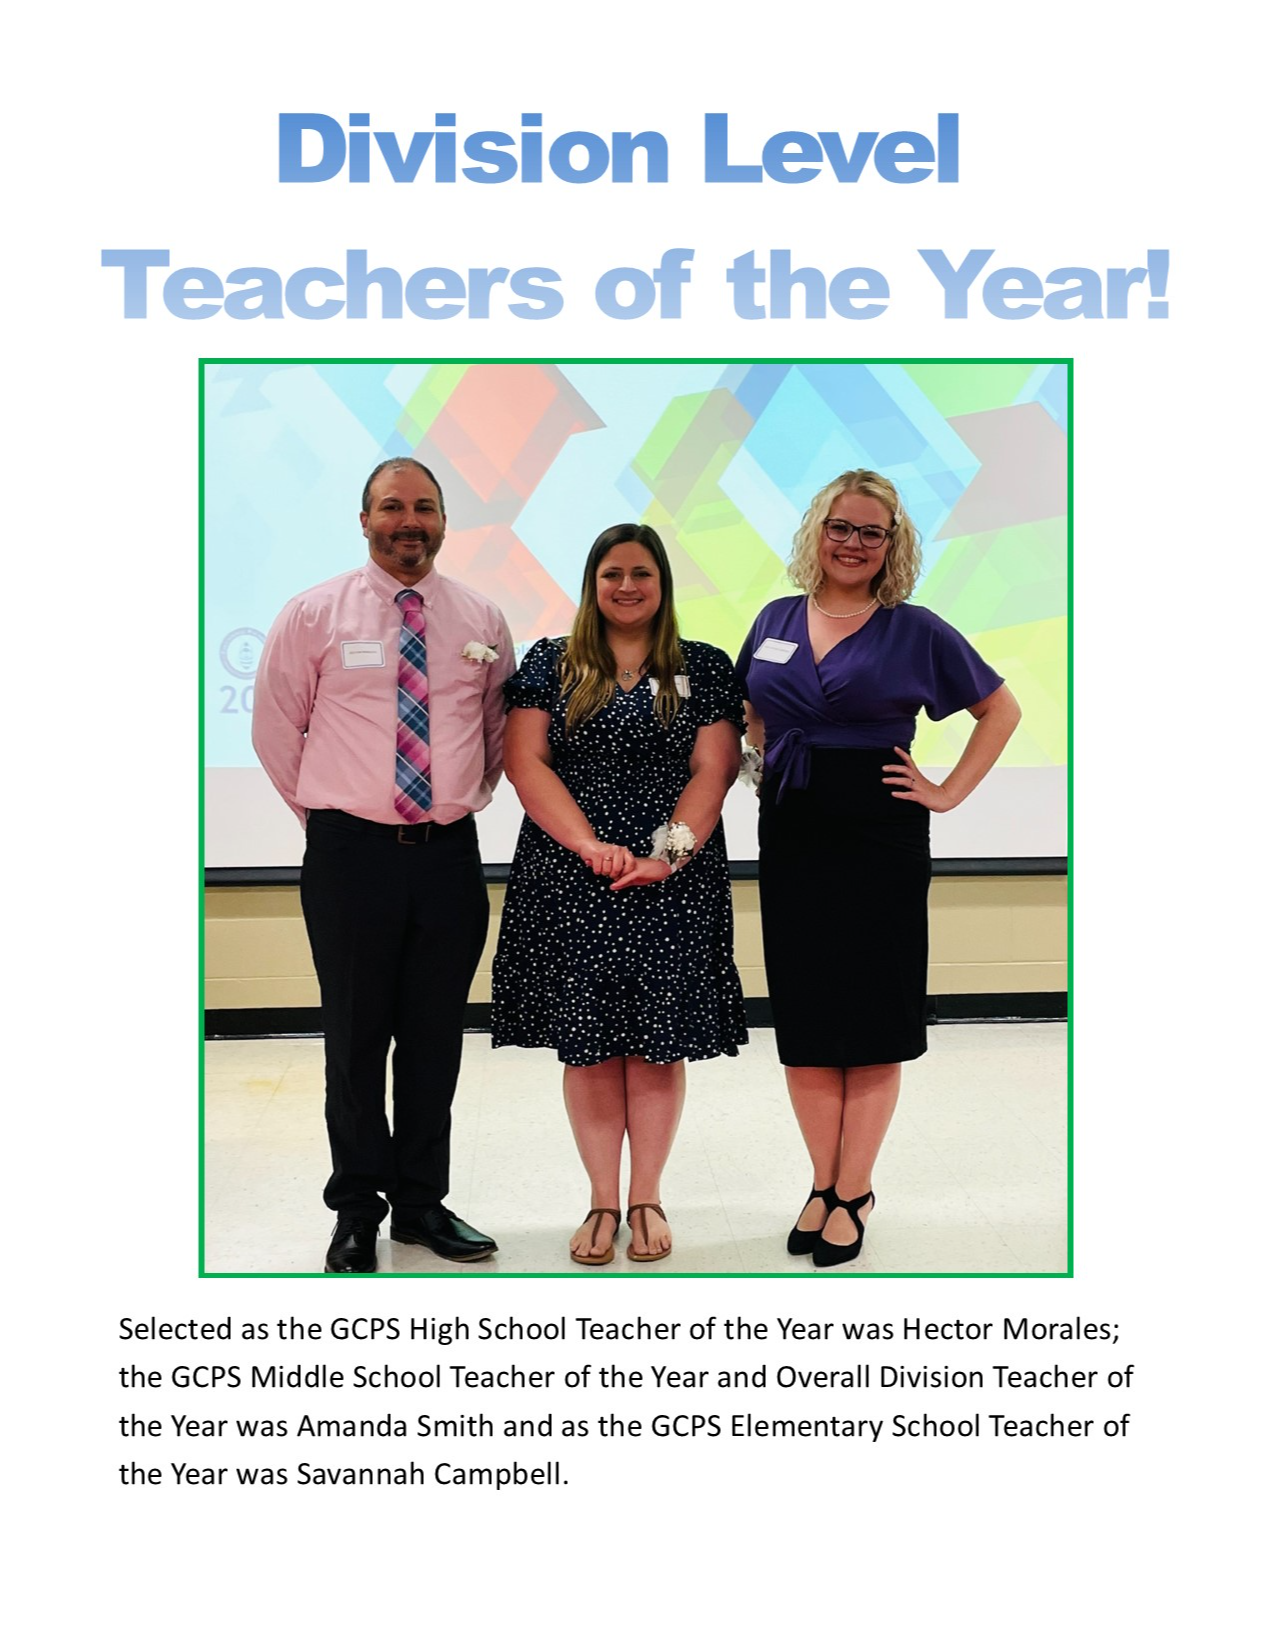 Division Level Teachers of the Year! 20 DL Selected as the GCPS High School Teacher of the Year was Hector Morales; the GCPS Middle School Teacher of the Year and Overall Division Teacher of the Year was Amanda Smith and as the GCPS Elementary School Teacher of the Year was Savannah Campbell.